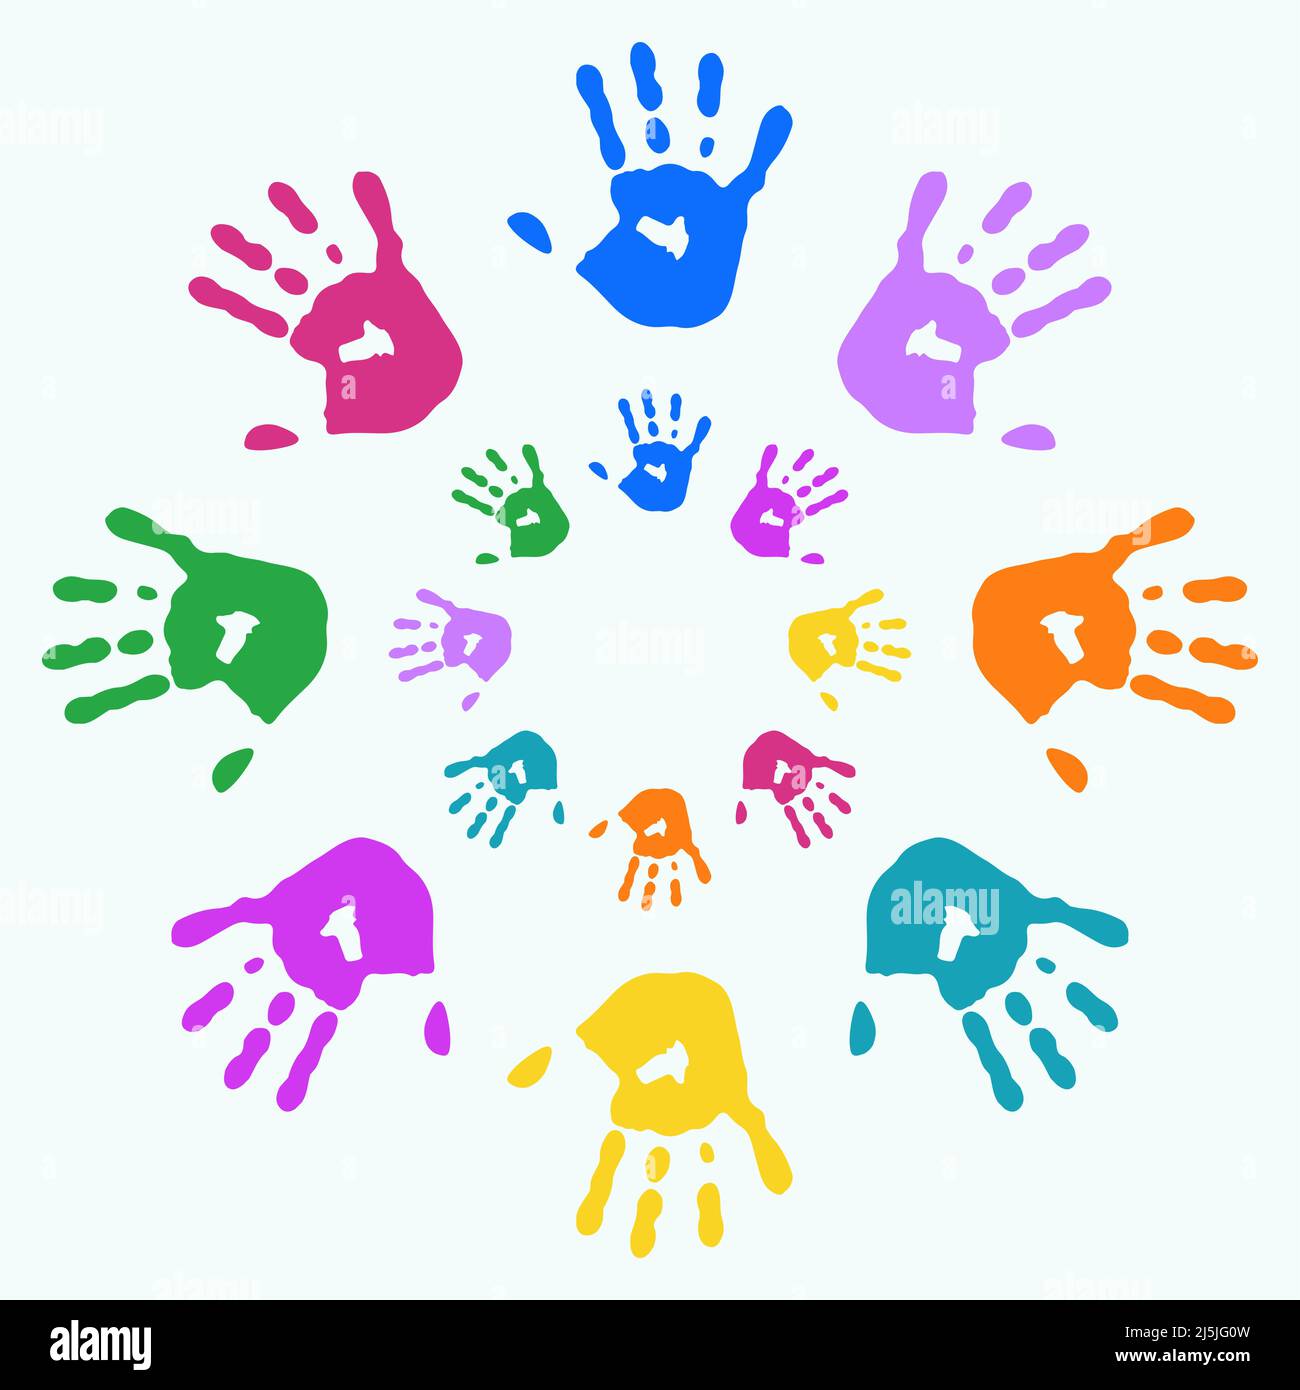 Colorful hands in circle position vector illustration Stock Vector